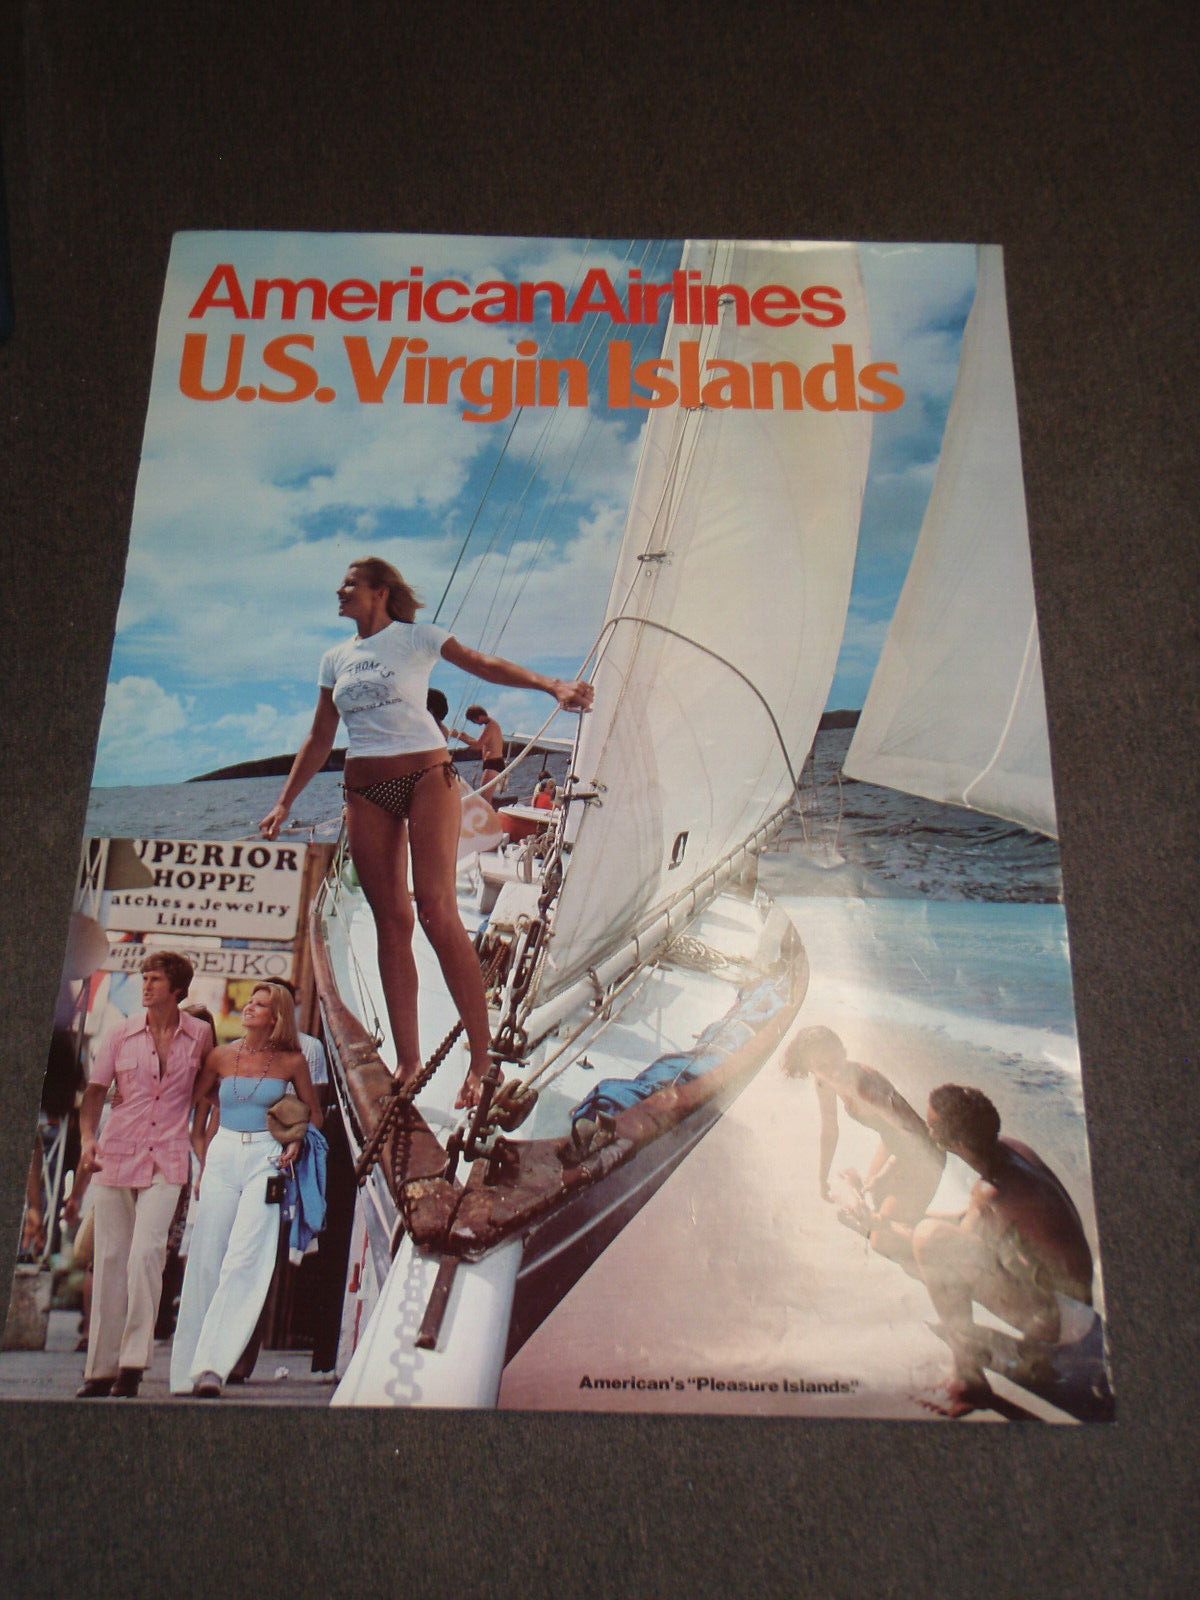 OLD ORIGINAL AMERICAN AIRLINES COLOR POSTER - 30 X 38 INCHES